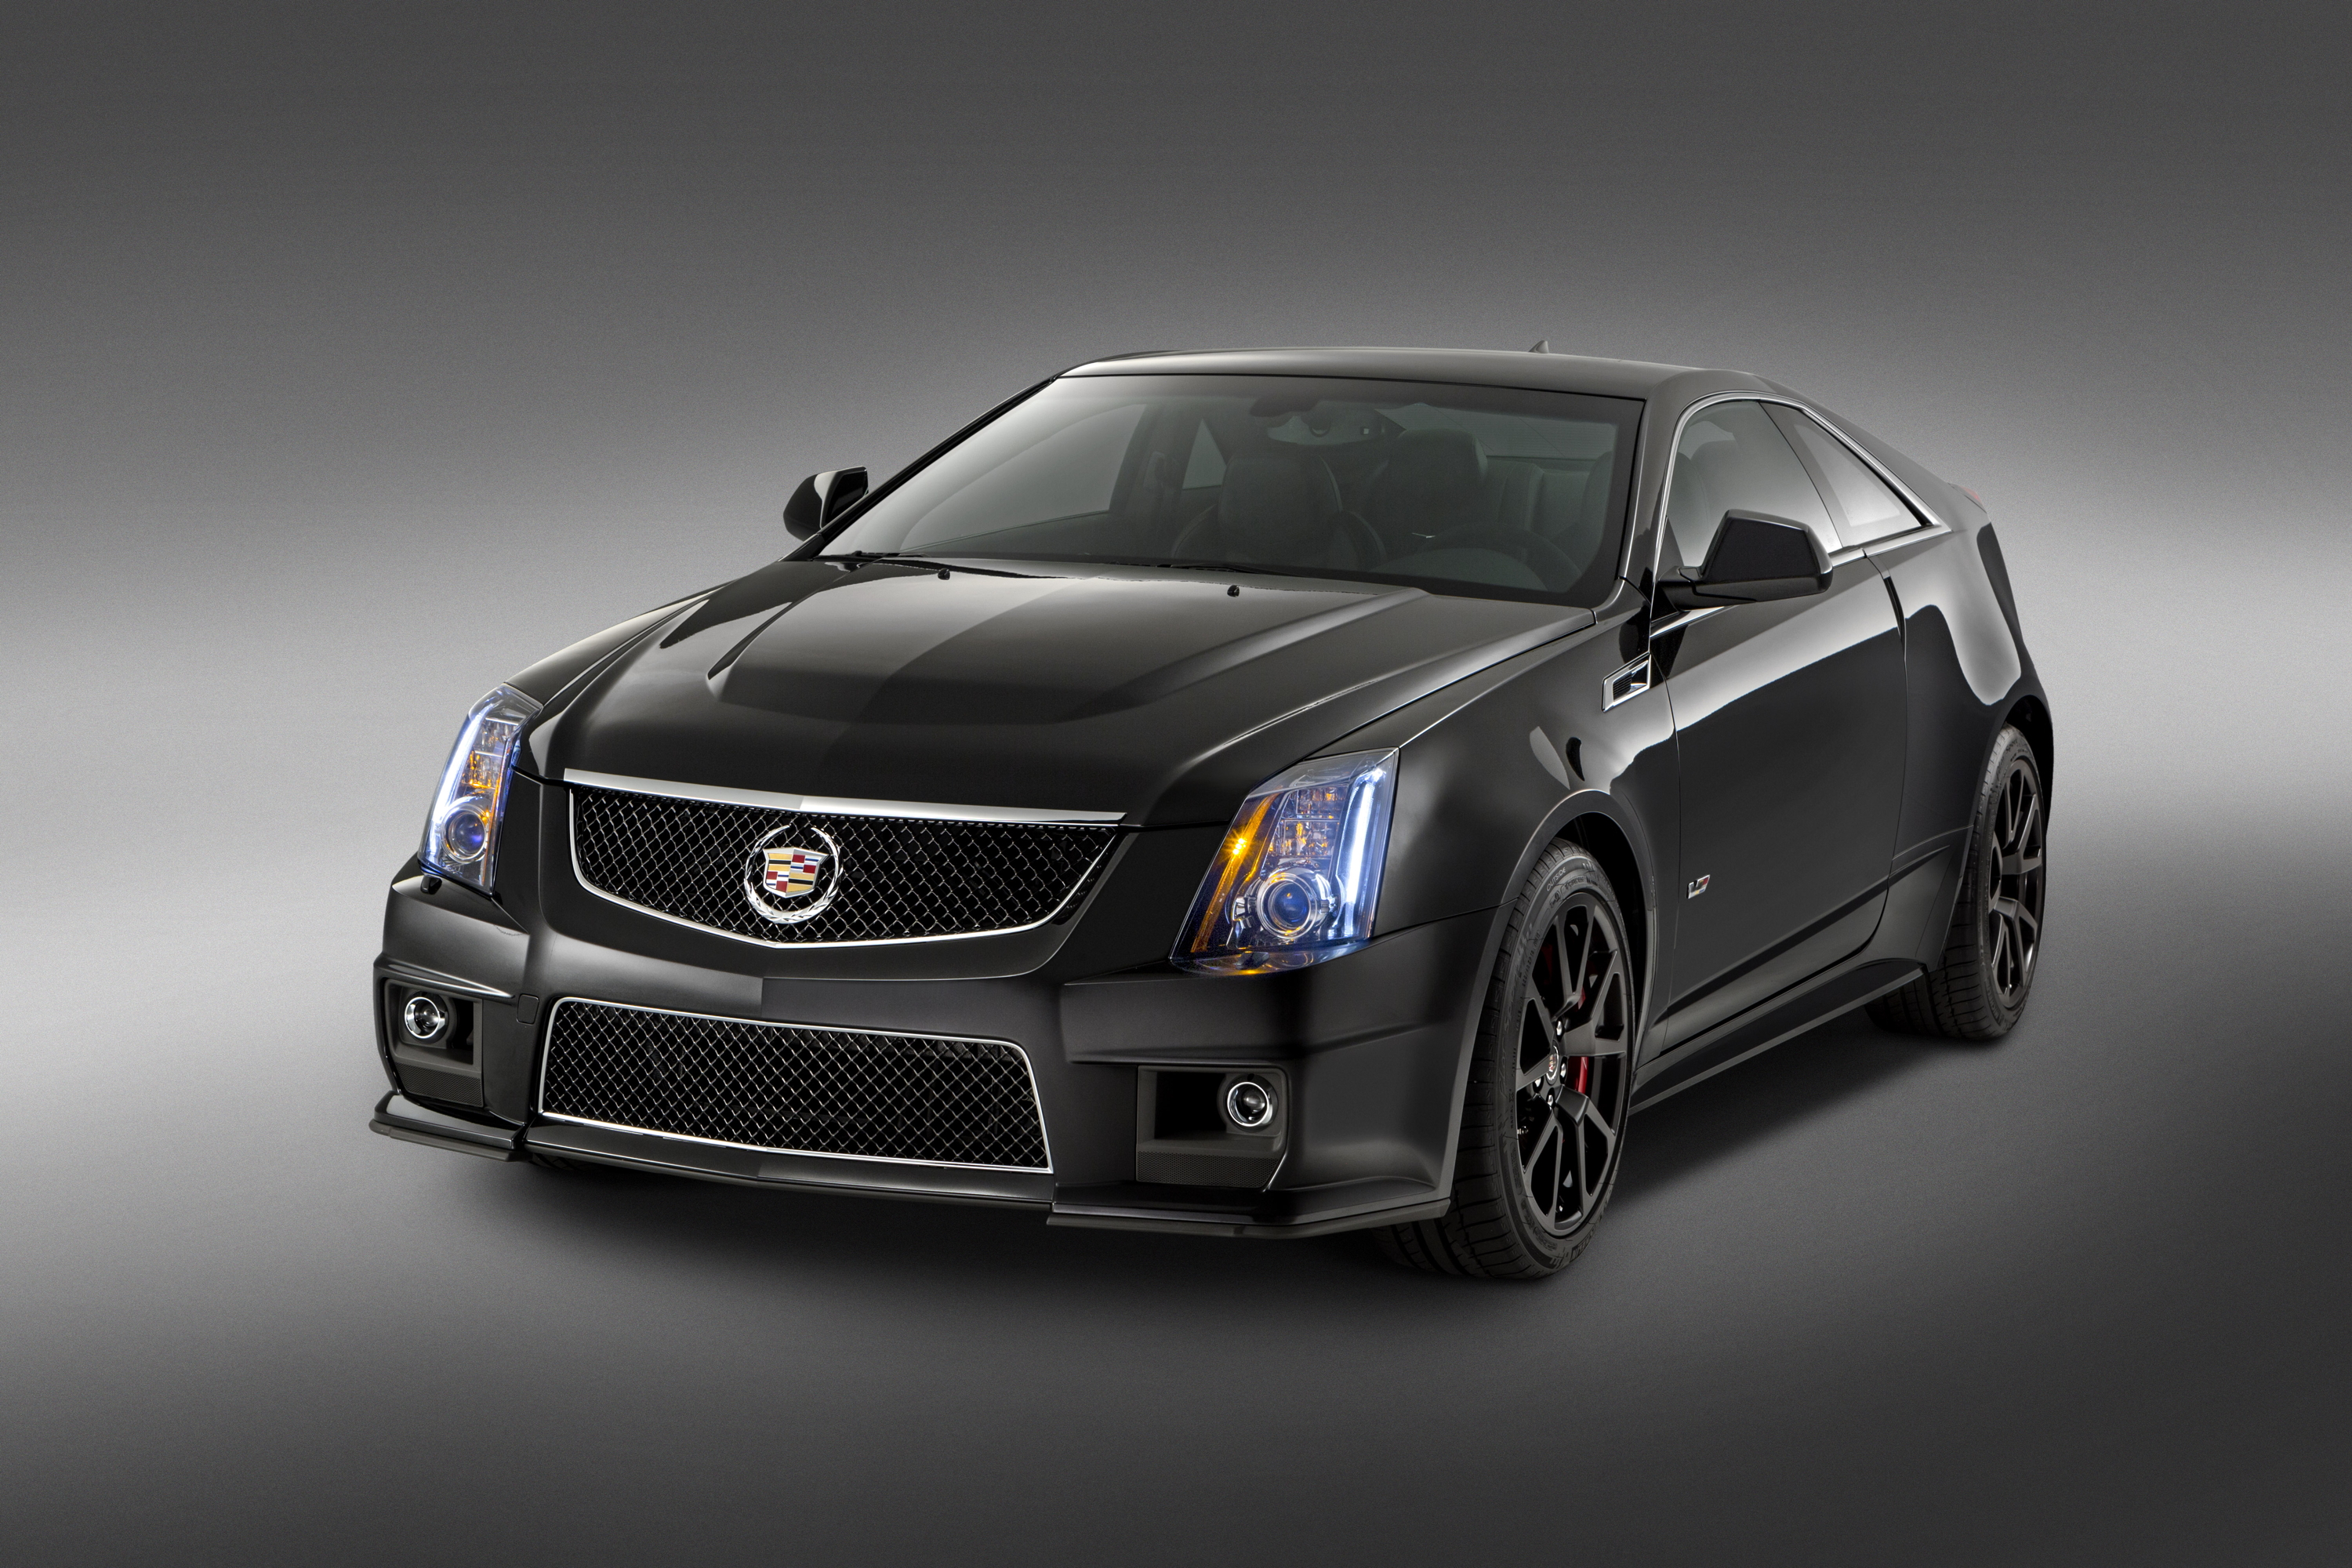 2015 Cadillac Cts V Coupe News From Testdrivenow Com